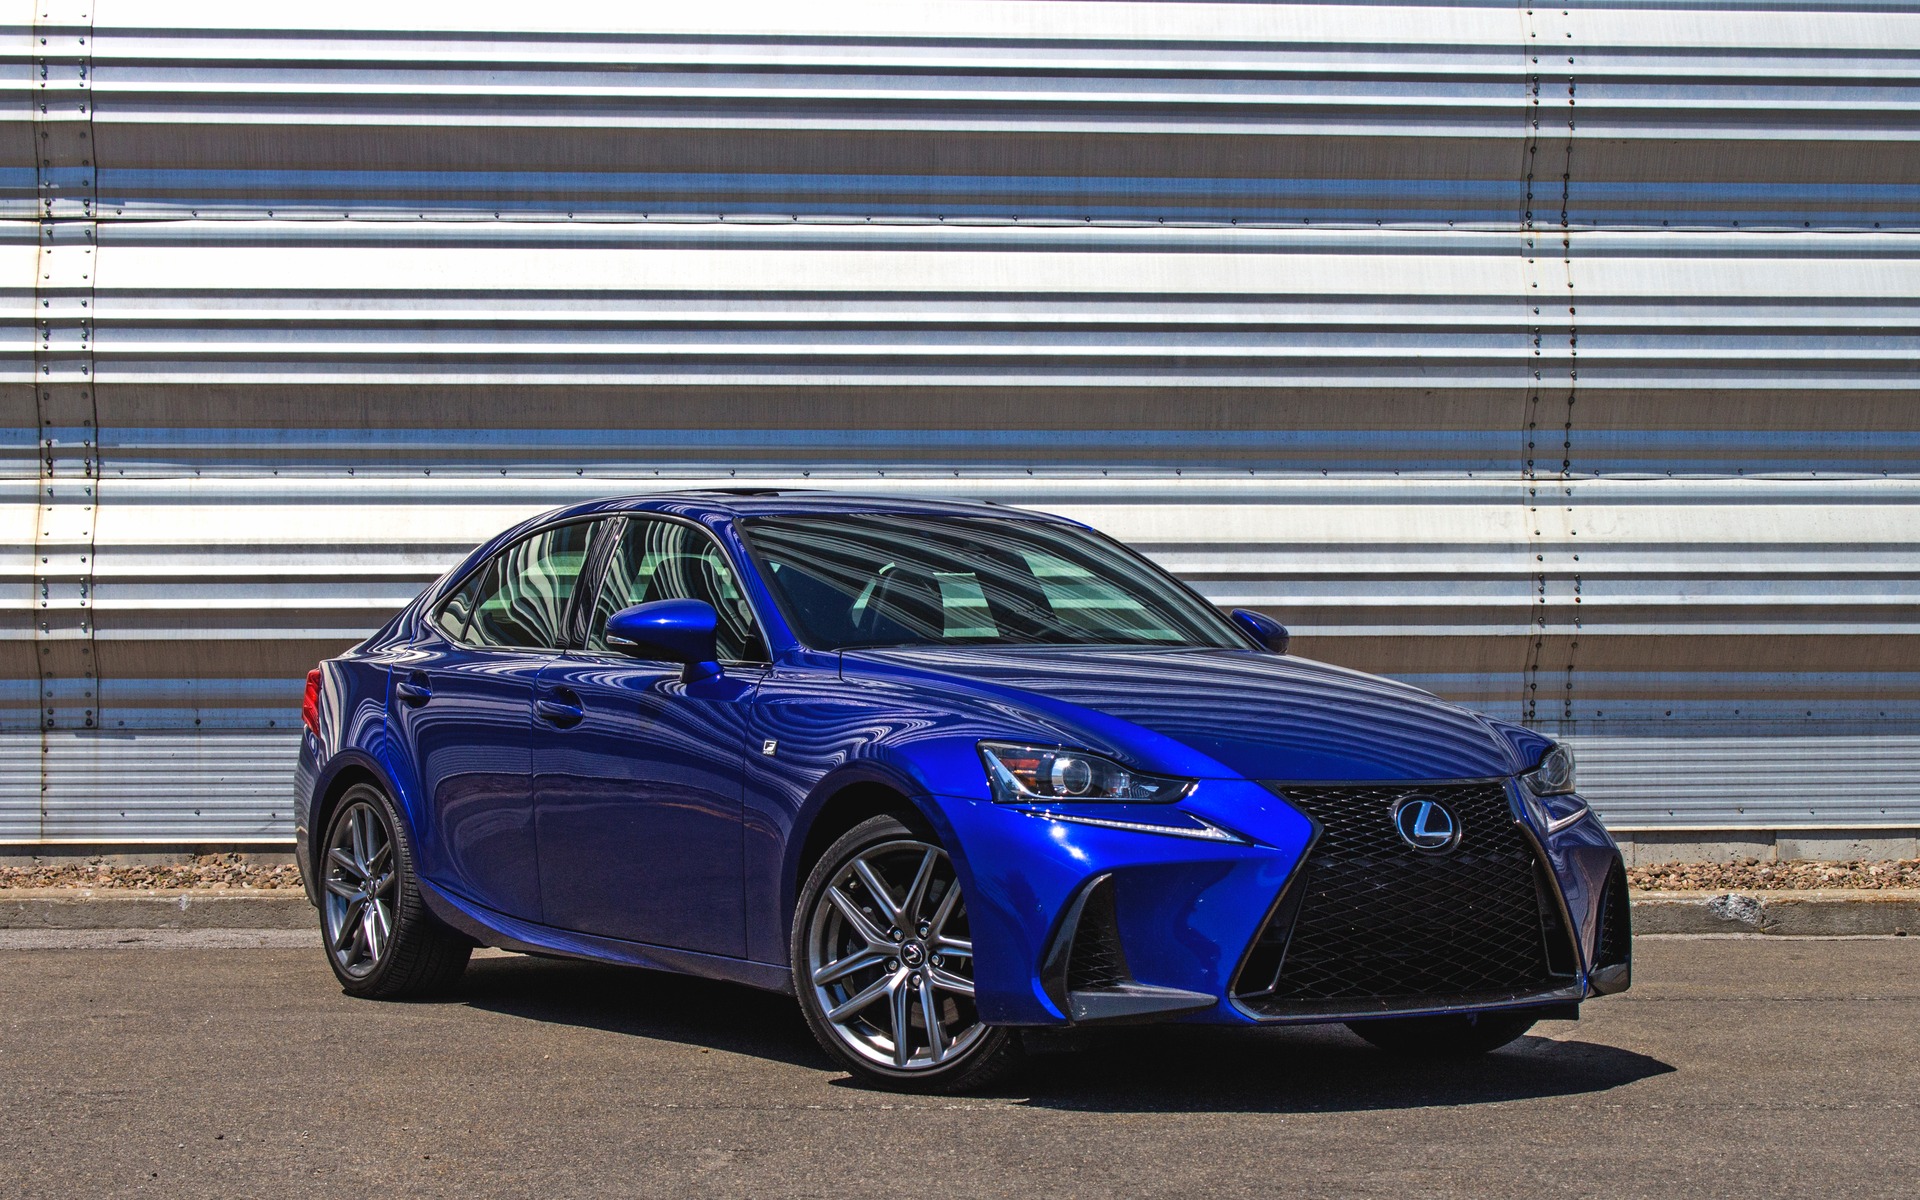 2018 Lexus IS 350 F SPORT: The 3 Series BMW Used to Build - The Car Guide